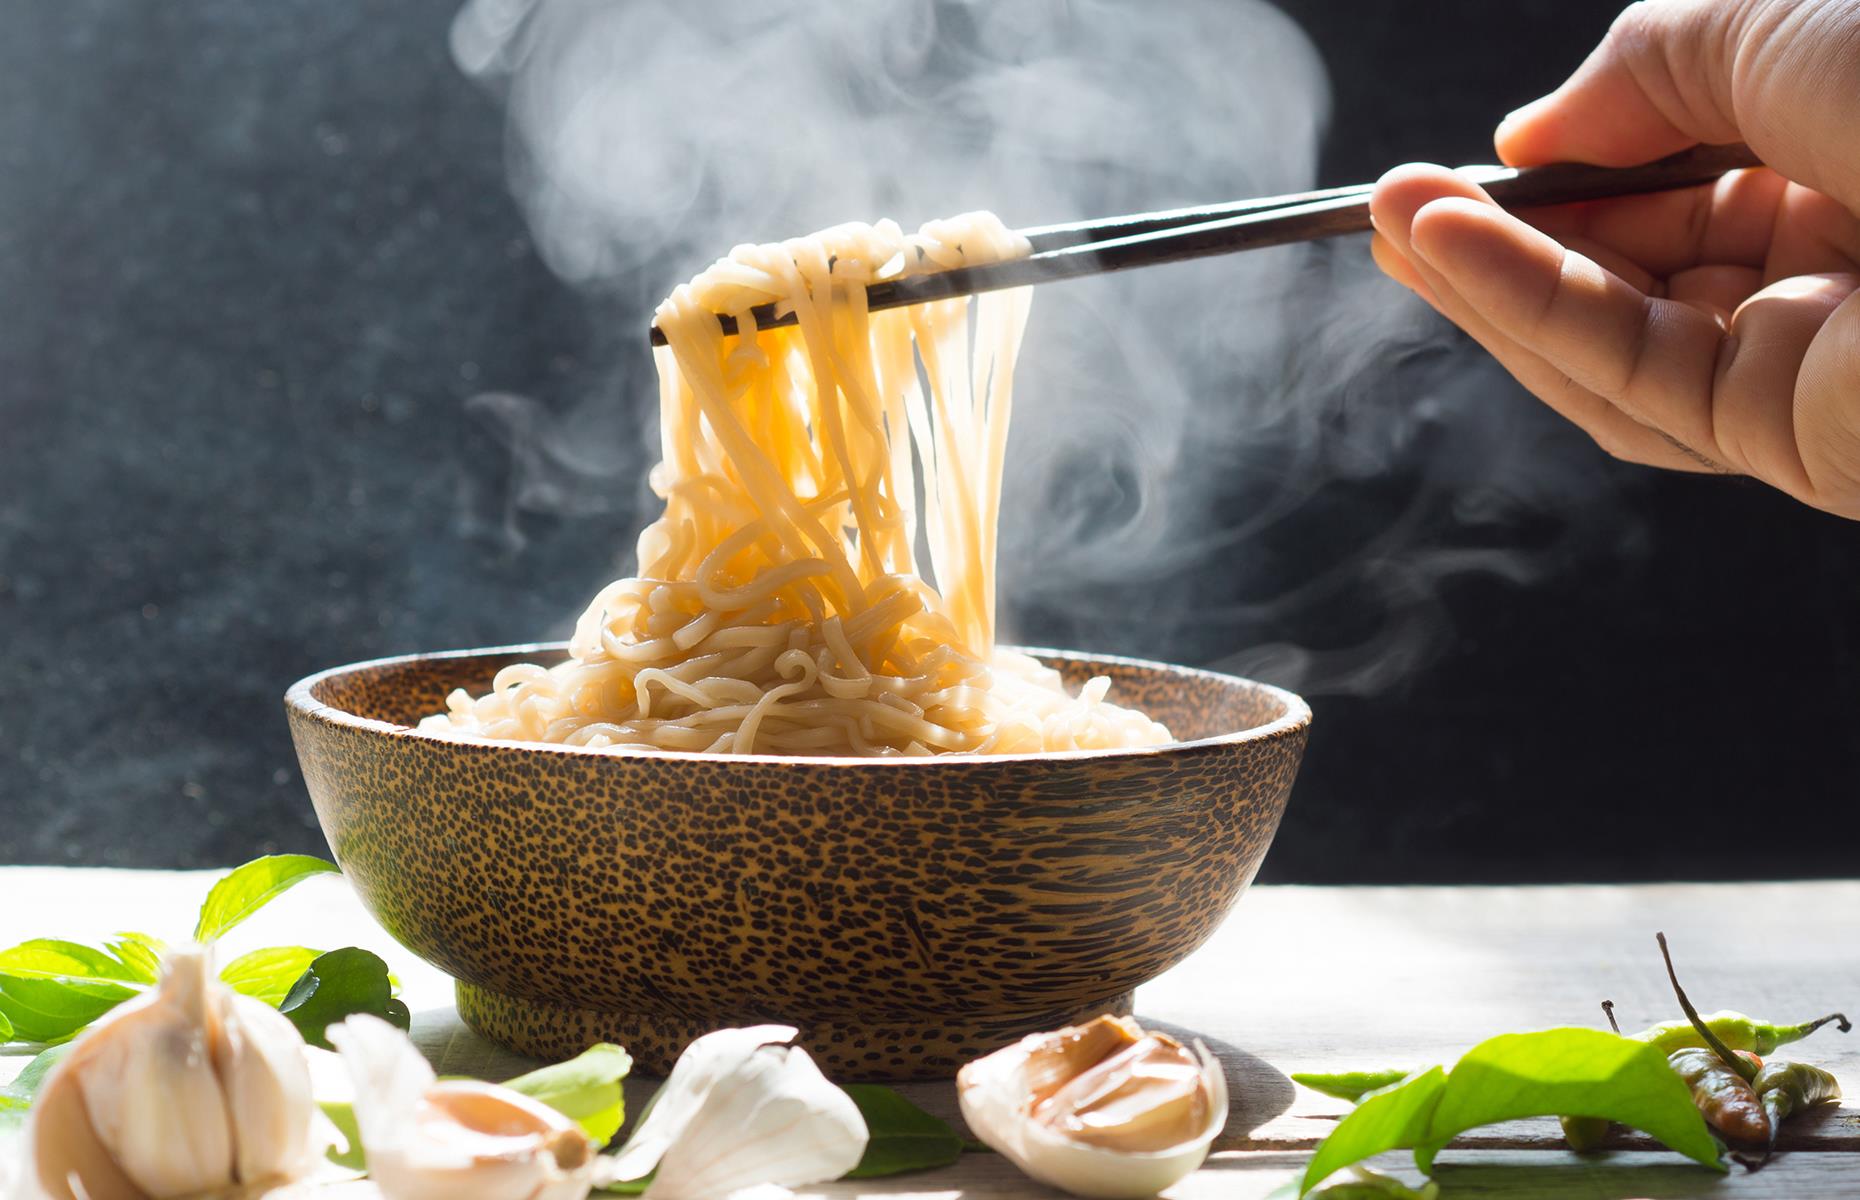 <p>Like many ancient foodstuffs, the origin of noodles – a stalwart of Asian cuisine today – is disputed. Theories linking noodles to ancient Italian, Arab and Chinese cultures abound, but <a href="https://www.nationalgeographic.com/news/2005/10/4-000-year-old-noodles-found-in-china/#:~:text=Noodle%20History&text=Prior%20to%20the%20discovery%20of,to%20Italy%20by%20the%20Arabs.">a discovery made back in 2005</a> may have solved the mystery. Archaeologists uncovered what they perceived to be 4,000-year-old noodles at the Lajia archaeological site in northwest China. Early mentions of the ingredient also appear in literature from China's Eastern Han Dynasty (dating to between AD 25 and 220).</p>